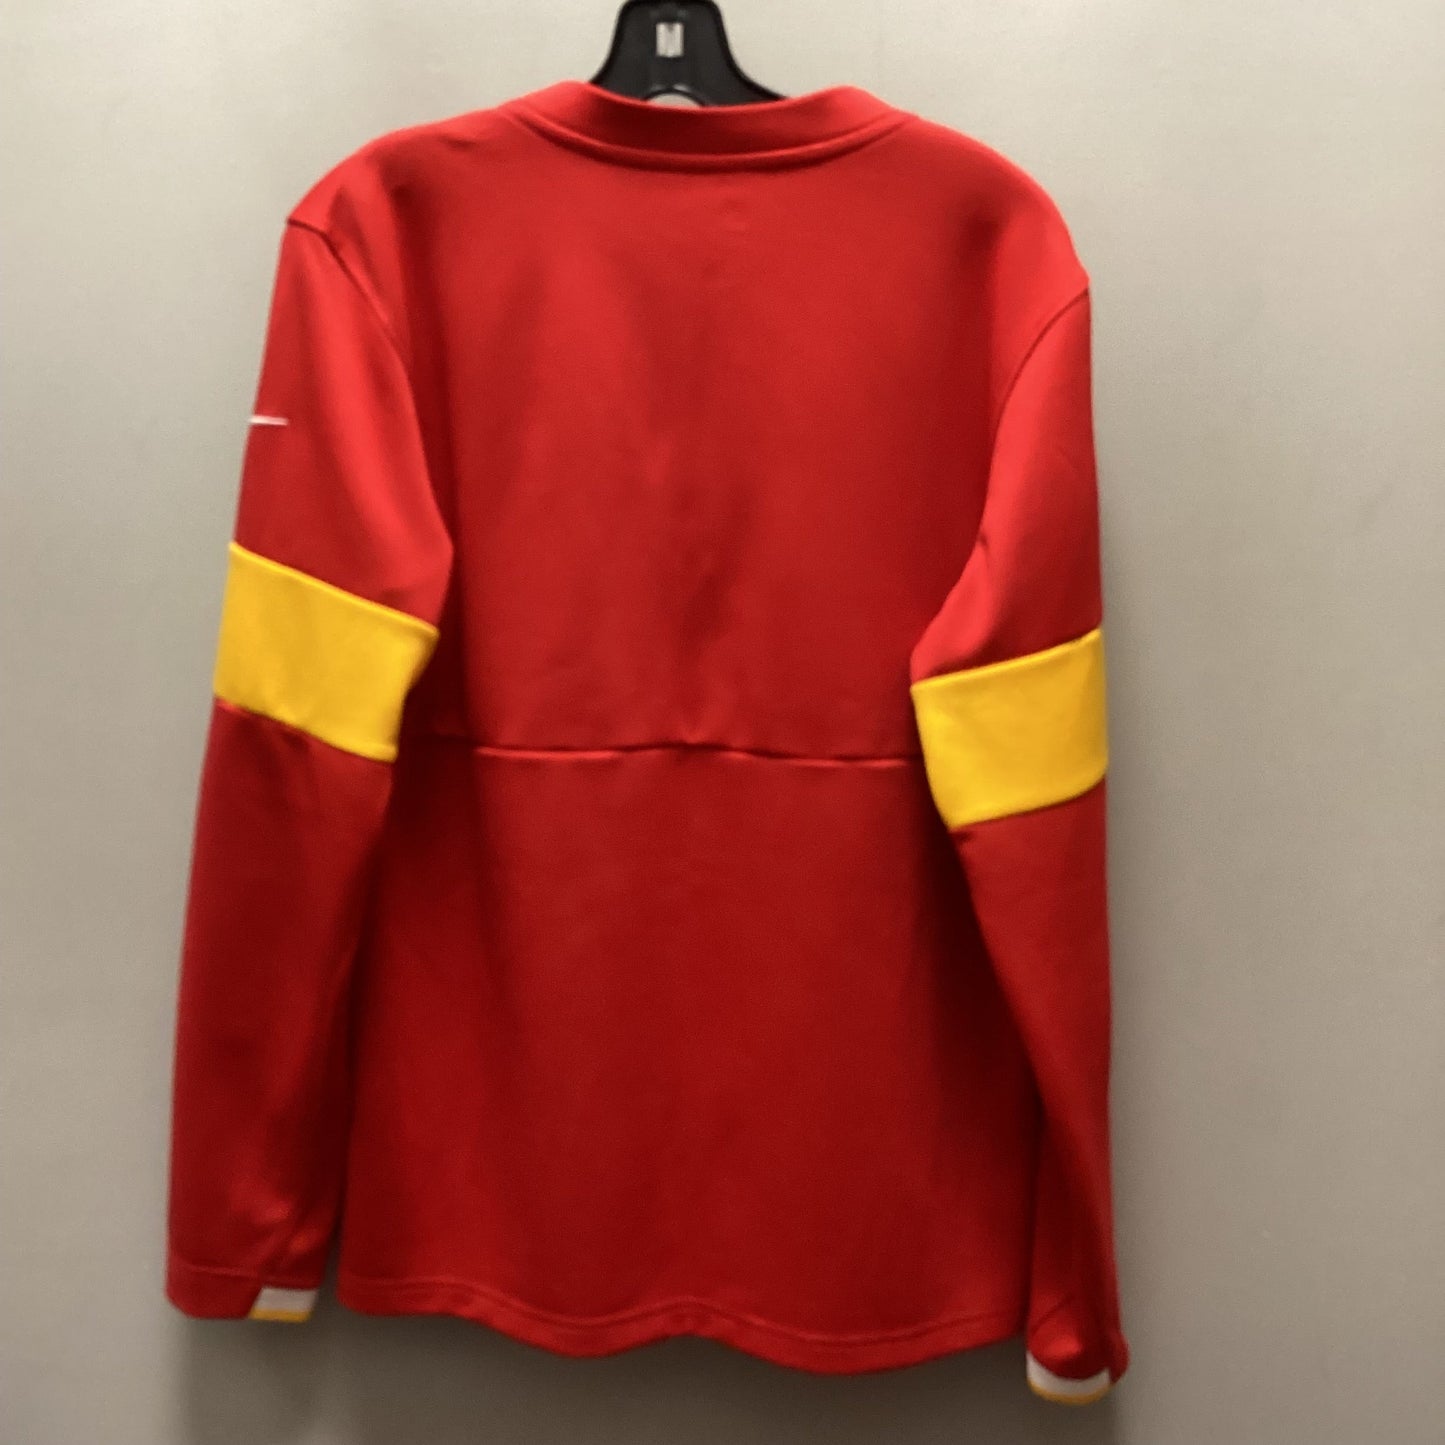 Red Athletic Top Long Sleeve Crewneck Nike Apparel, Size S